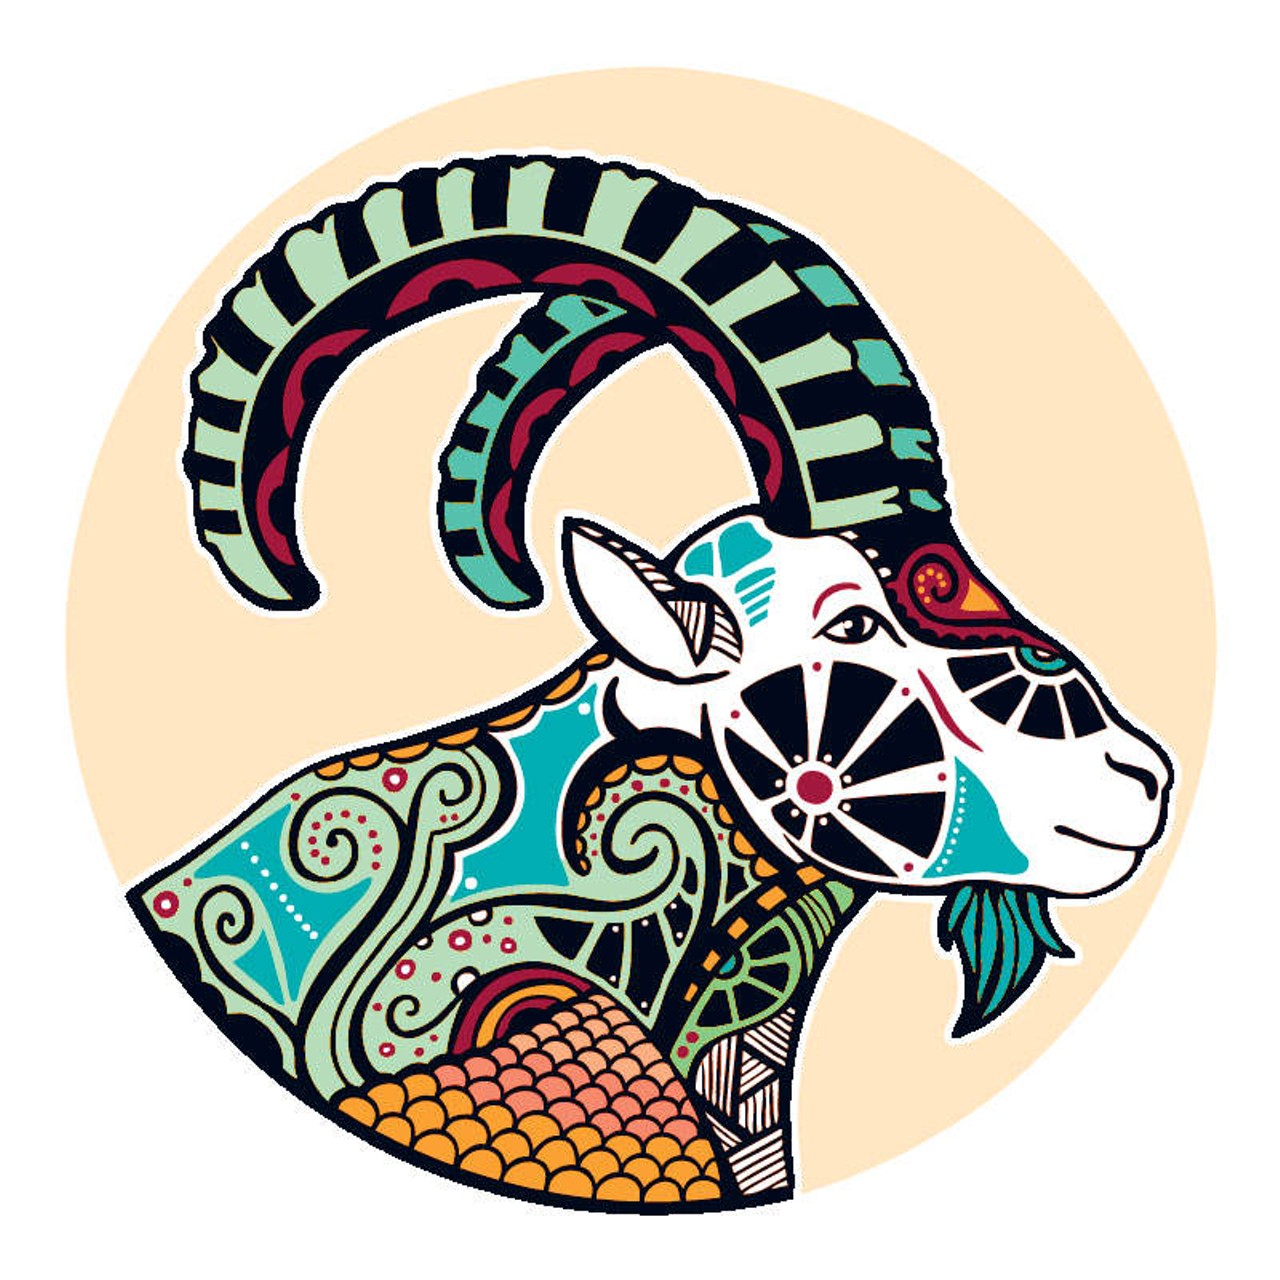 CAPRICORN (Dec. 21-Jan. 20): 
The past few weeks have brought up tons of old stuff. Going around the barn one more time, you are seeing a little bit more of both your self, and of the issues that got you here. With a wider view, all of a sudden what seemed cut and dried only a month or two ago is now a totally different story. If you were clear and confident about all of this, at this point it&#146;s time to make sure that your motives are 100 percent real and true. Things will take off like a rocket if that&#146;s where you&#146;re coming from. One whiff of greed or ego could see this whole ball of wax sink like a stone.